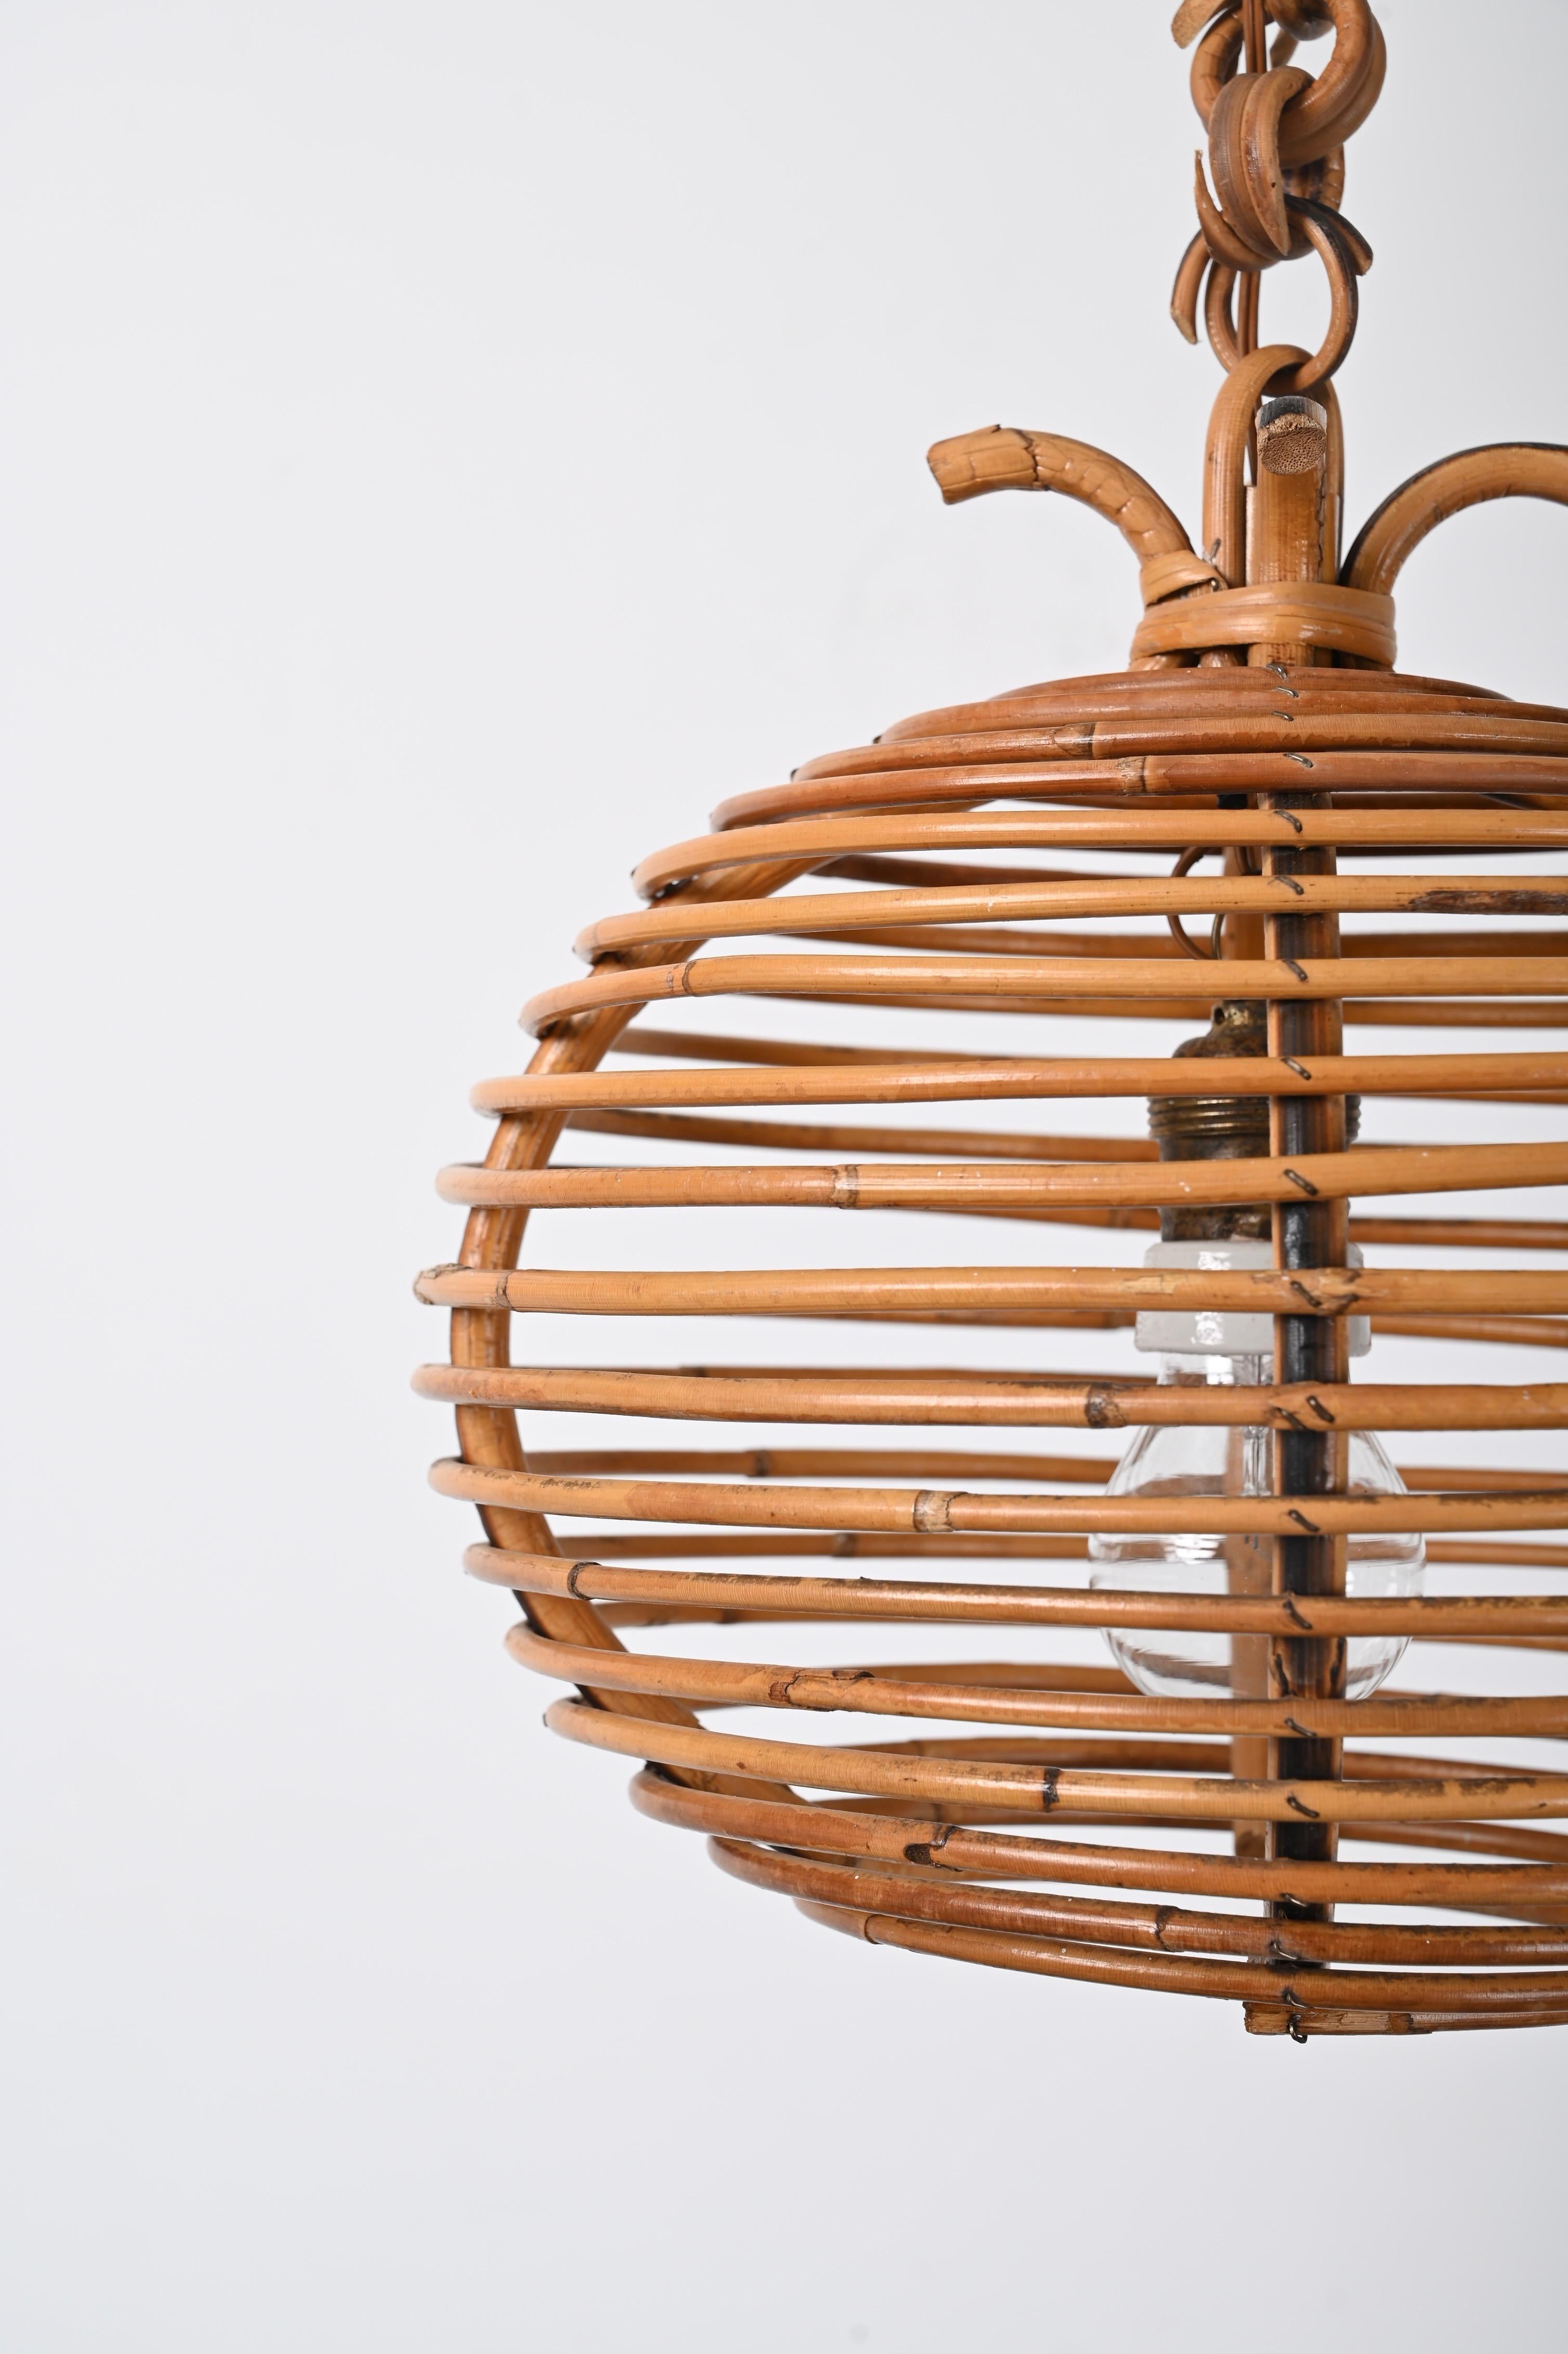 Midcentury French Riviera Bambo and Rattan Spherical Italian Chandelier, 1960s For Sale 2